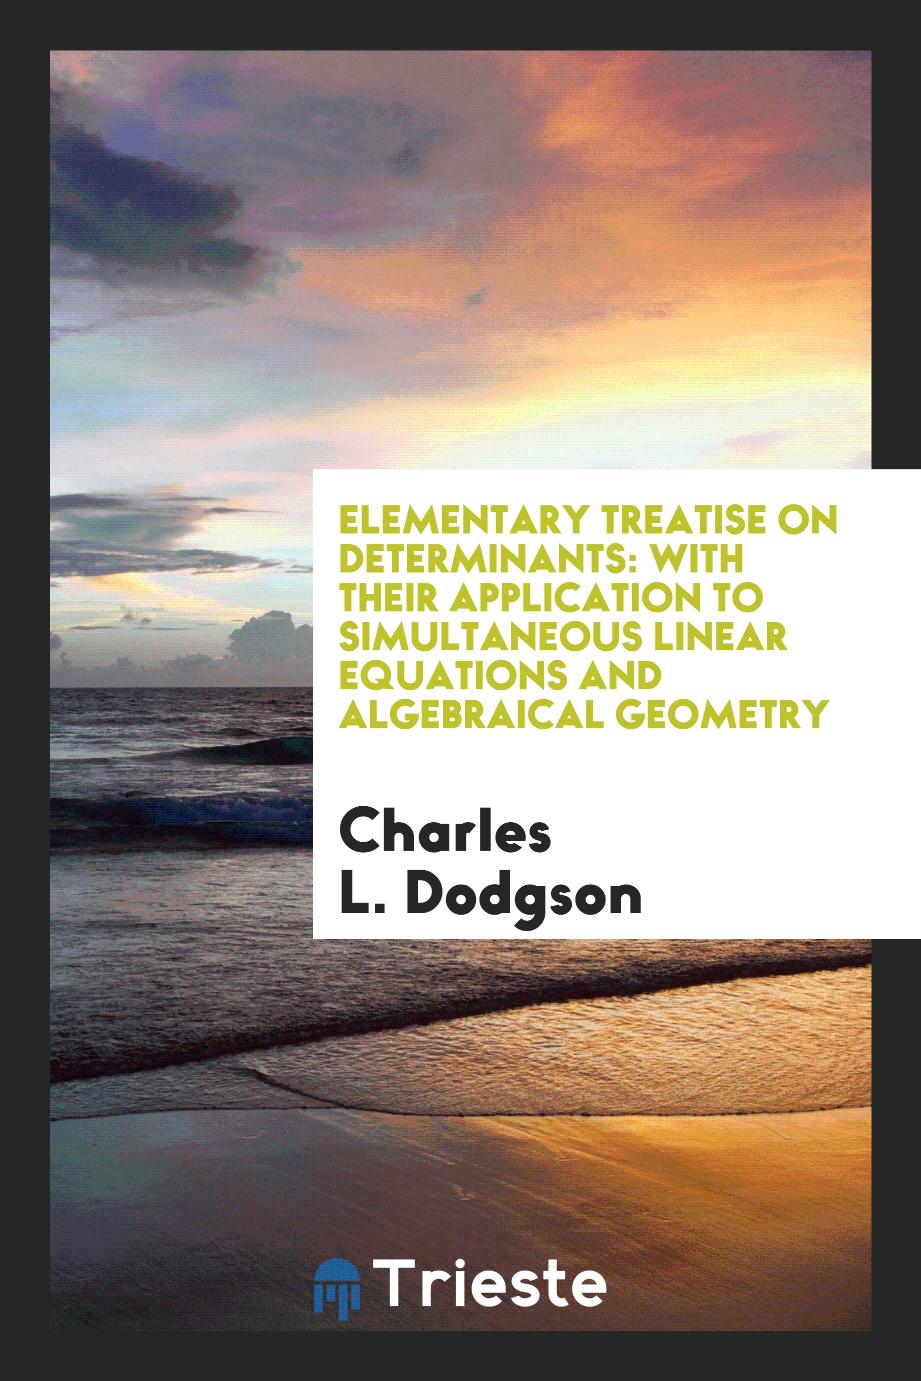 Elementary Treatise on Determinants: With Their Application to Simultaneous Linear Equations and Algebraical Geometry